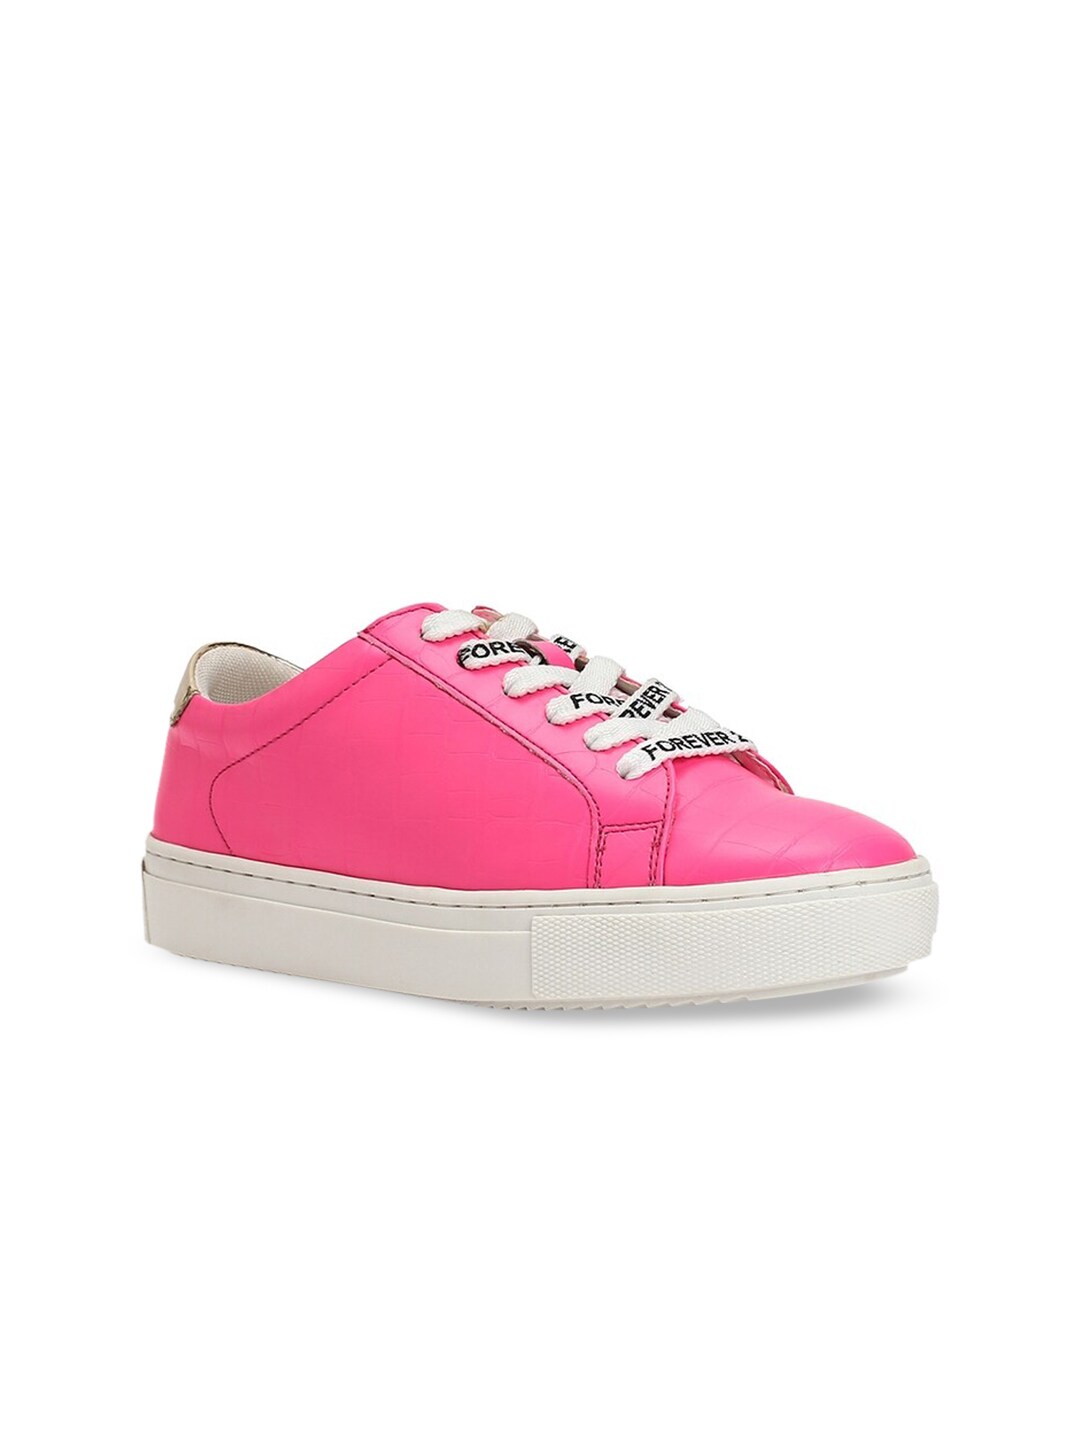 FOREVER 21 Women Pink Solid Sneakers Price in India